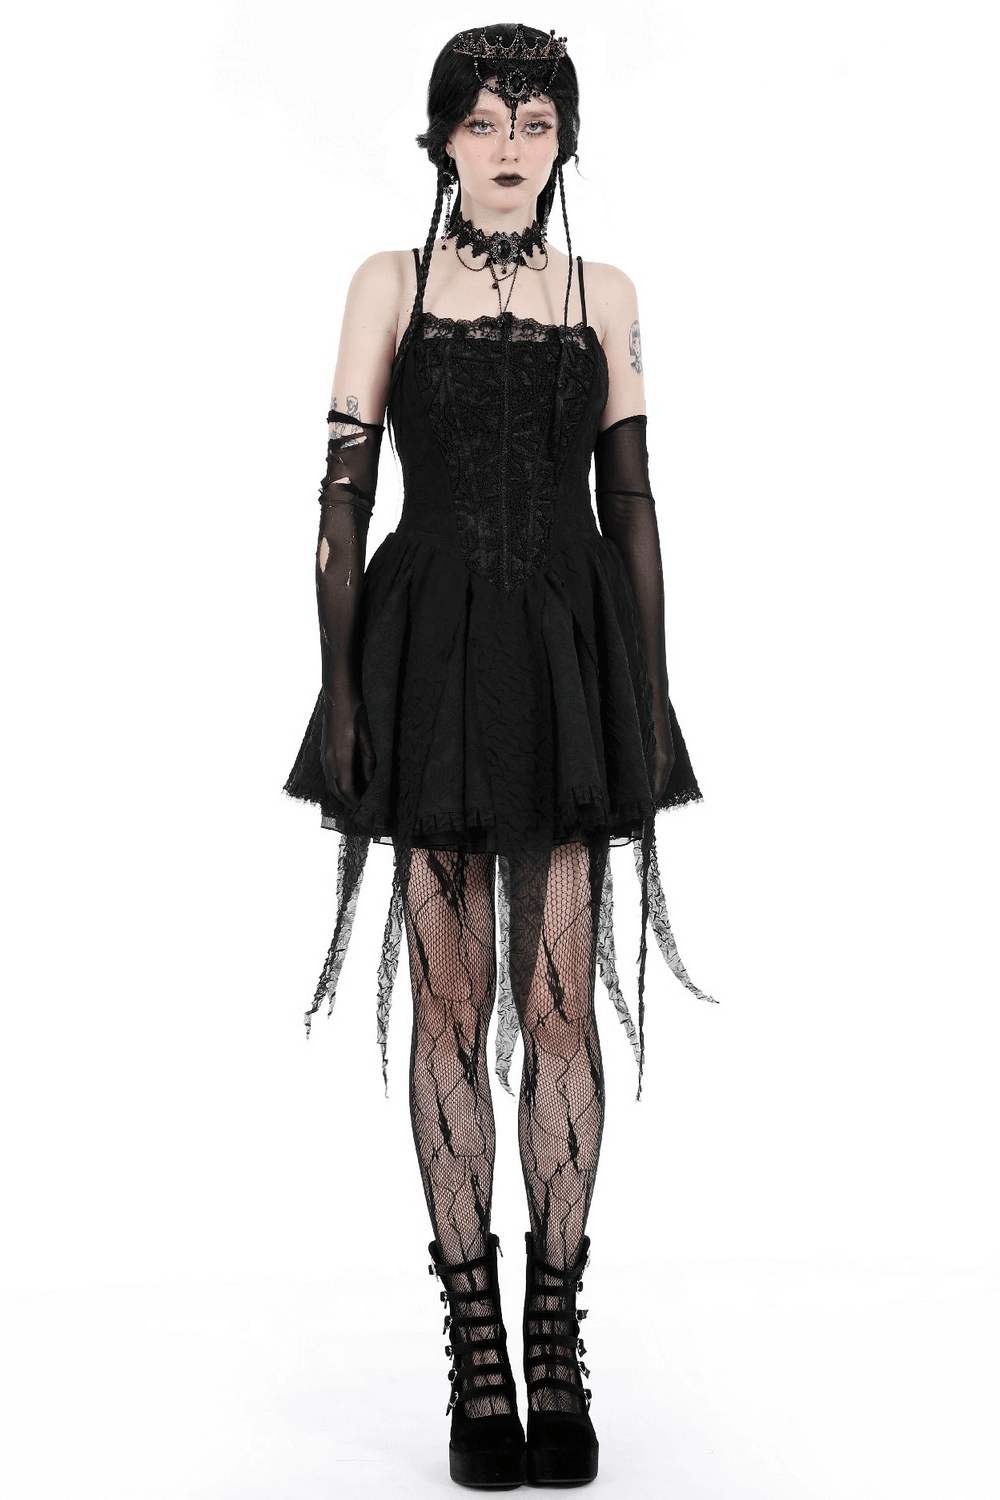 Stunning Gothic Lace Dress with Straps for Women